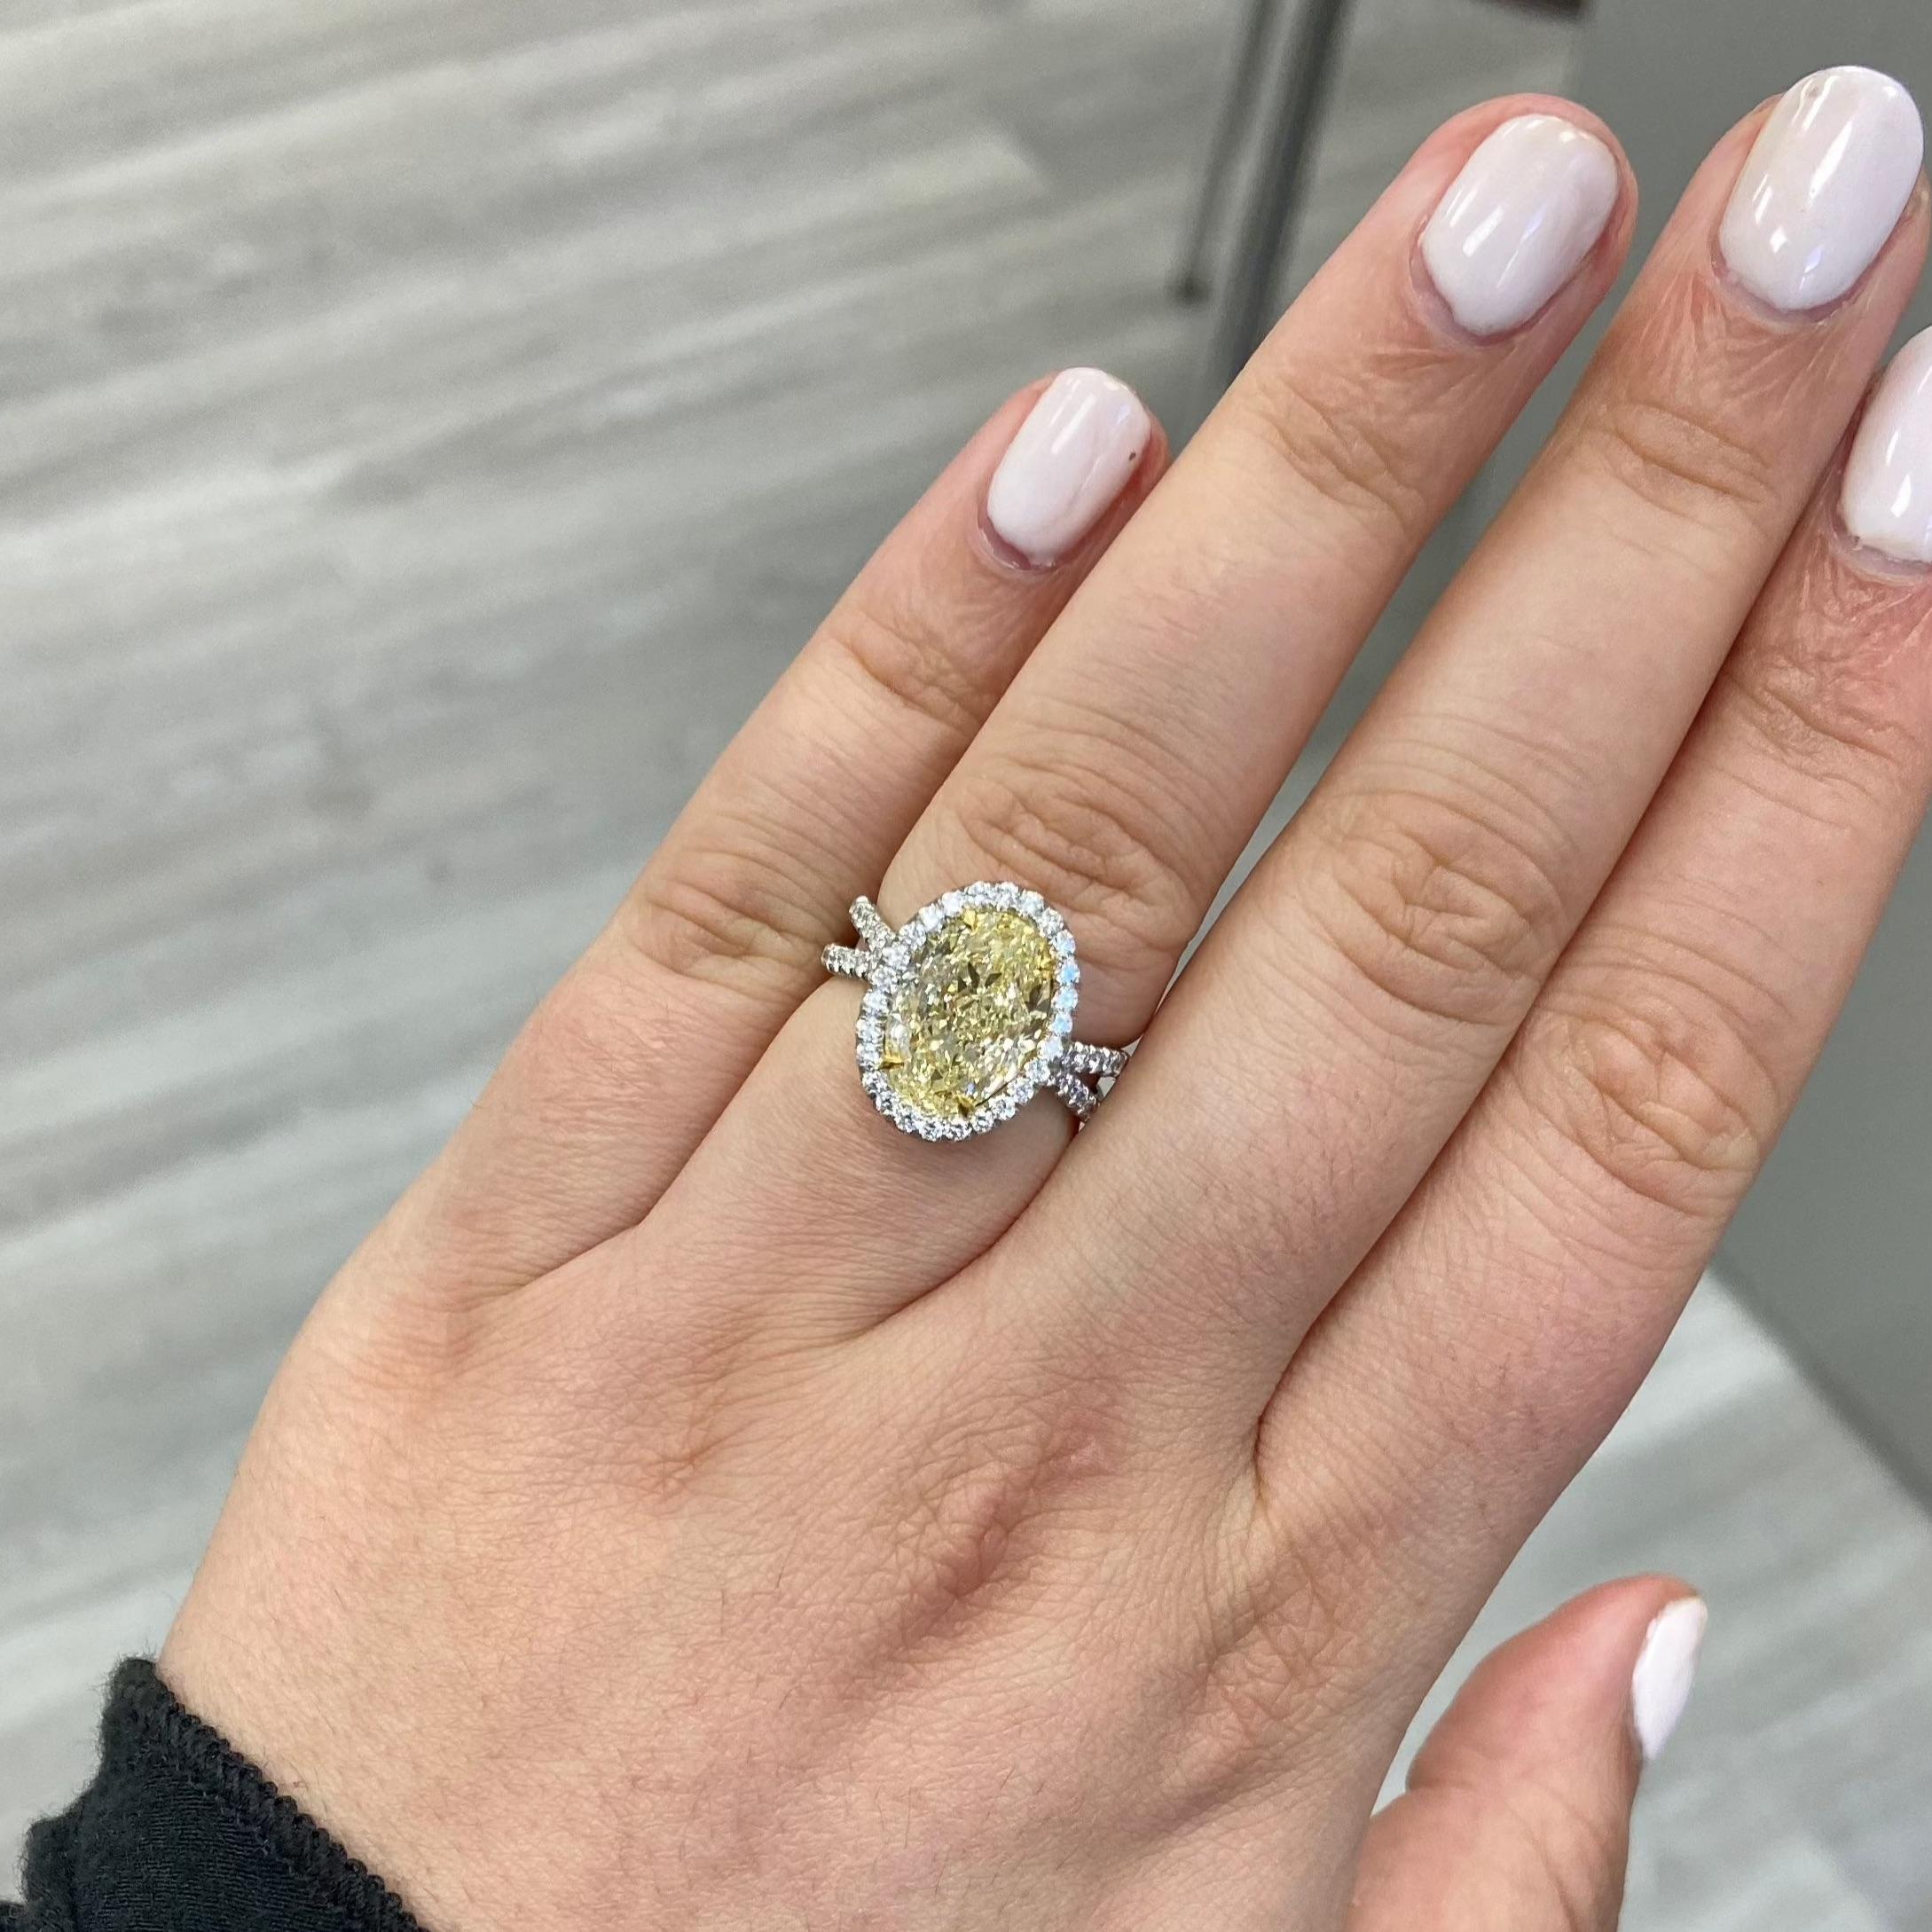 Beautiful 4 and a half carat light yellow  oval diamond set in a platinum and 18 karat yellow gold ring with a white diamond halo a twisted design shank. 
Color faces up like a fancy yellow diamond due to he 18 yellow gold.  
Stone is full of life,